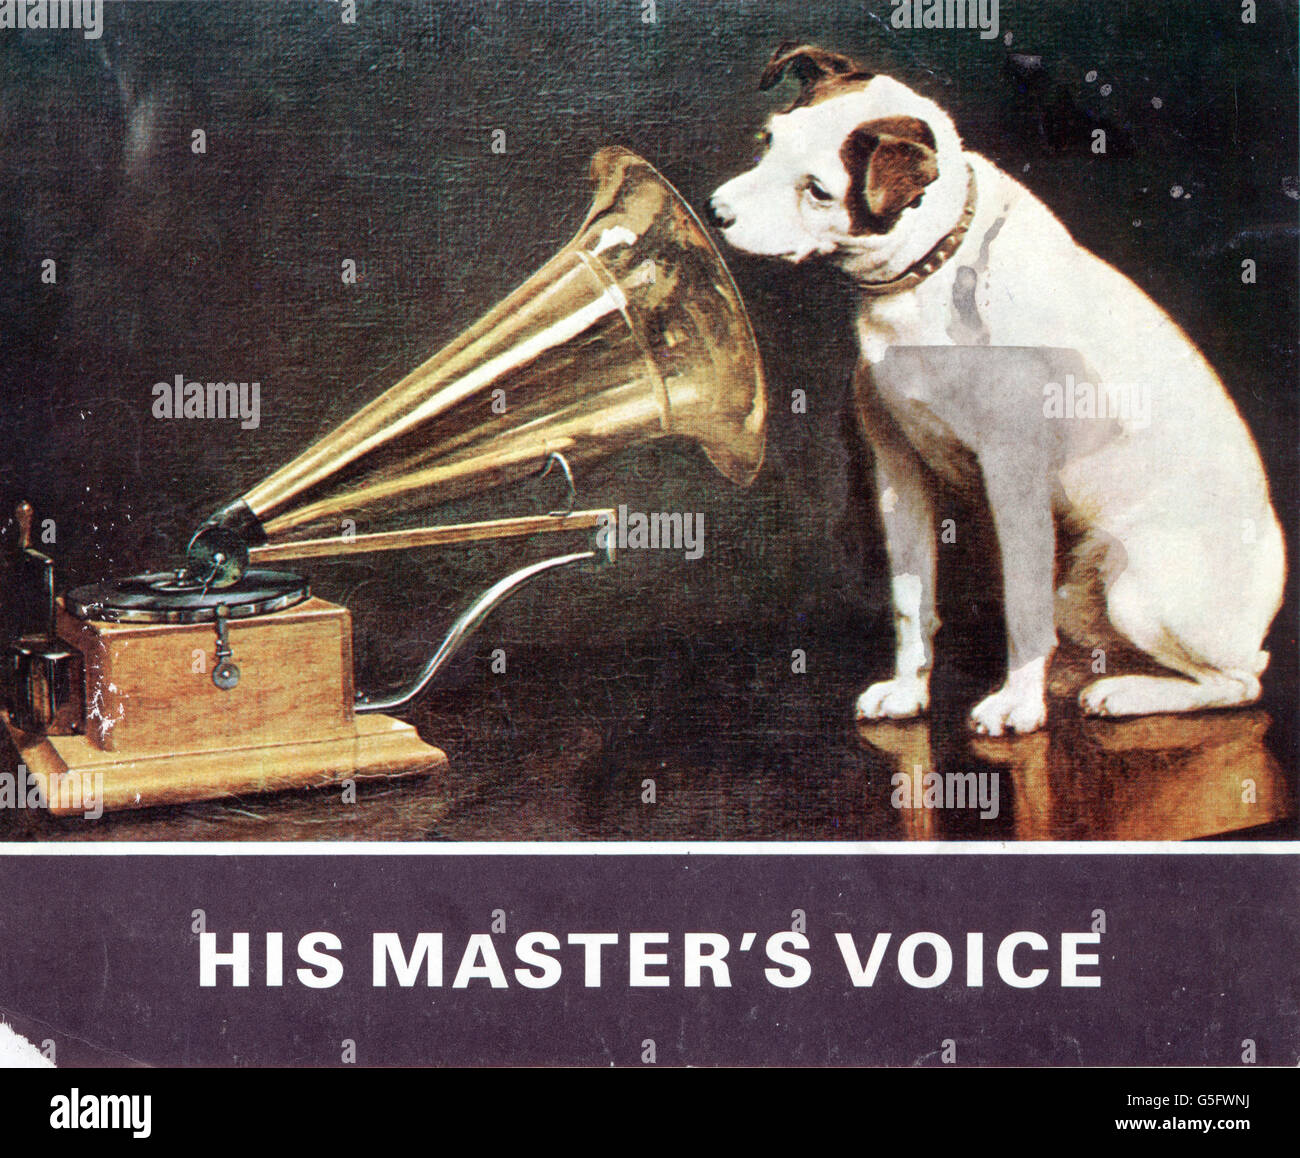 His Master's Voice Dog High Resolution Stock Photography and Images - Alamy